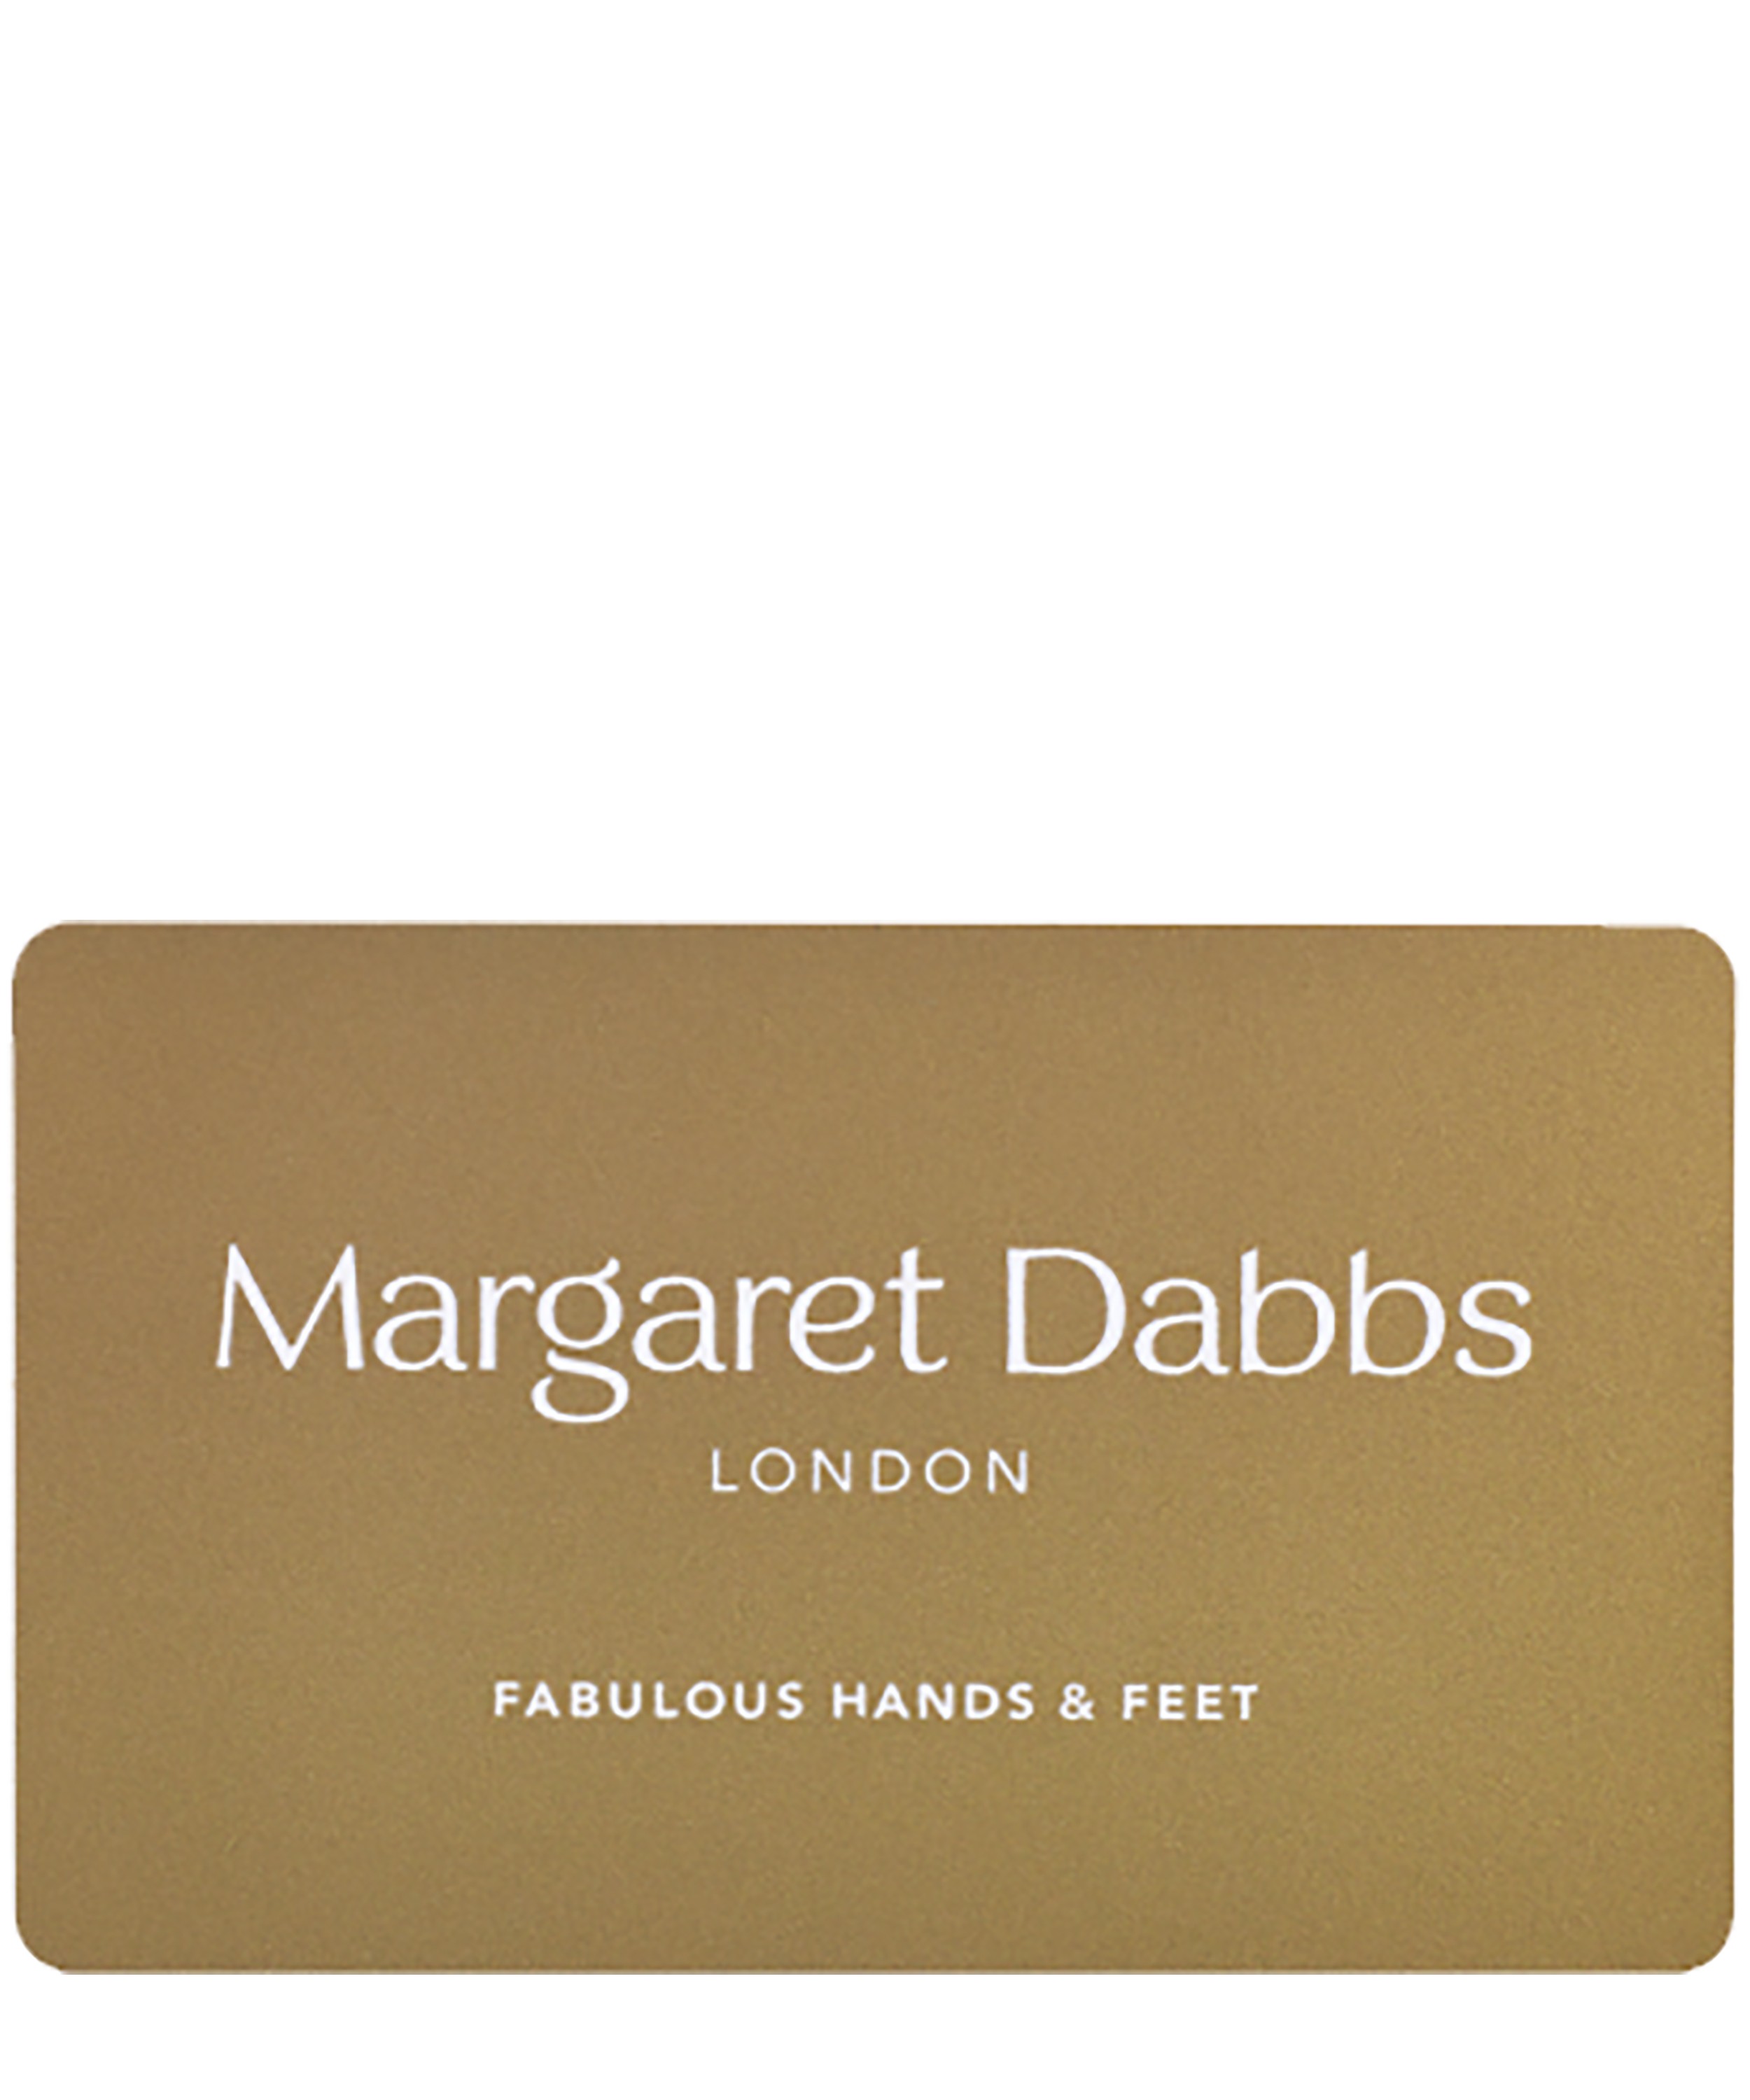 Margaret Dabbs London - Sole Spa Shape and Polish Manicure at Liberty image number null